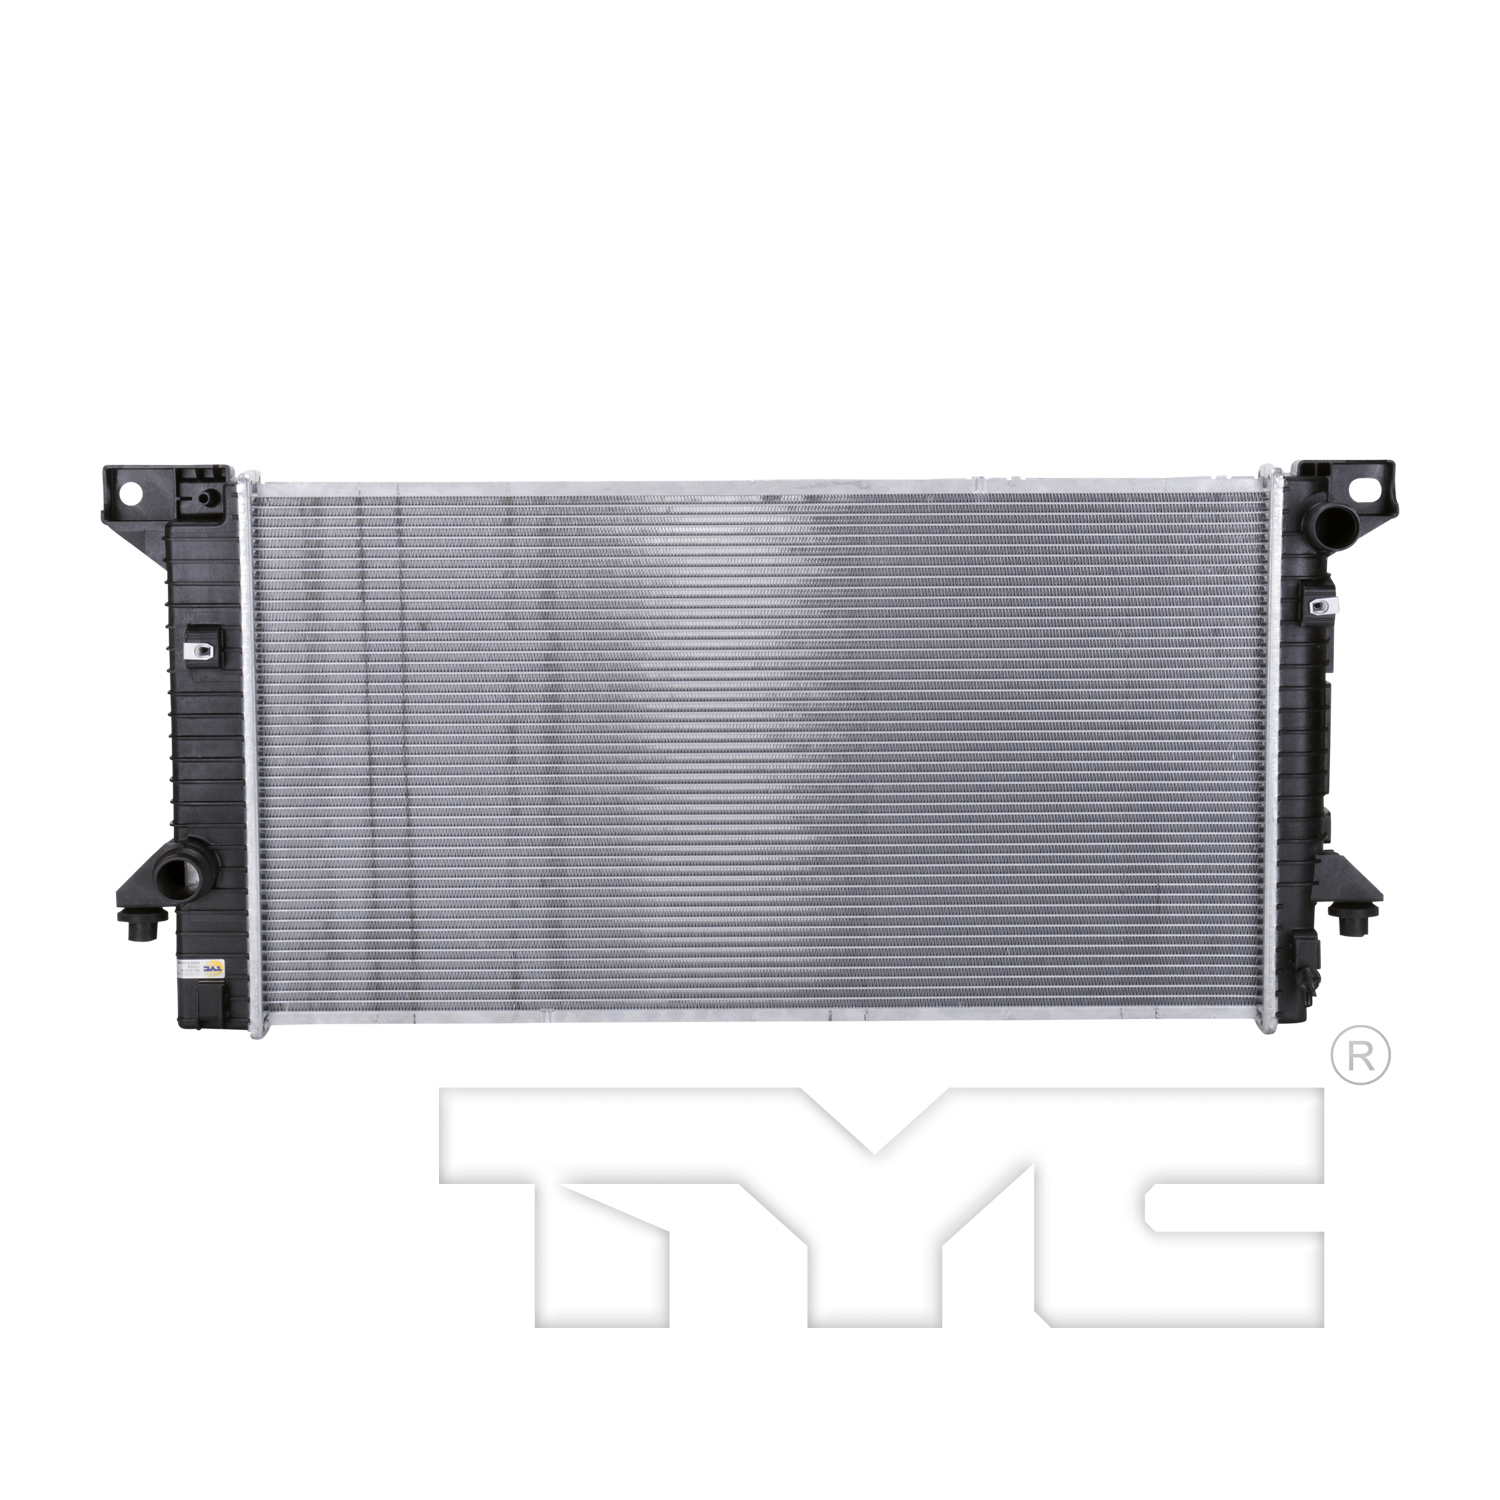 Aftermarket RADIATORS for FORD - EXPEDITION, EXPEDITION,15-17,Radiator assembly